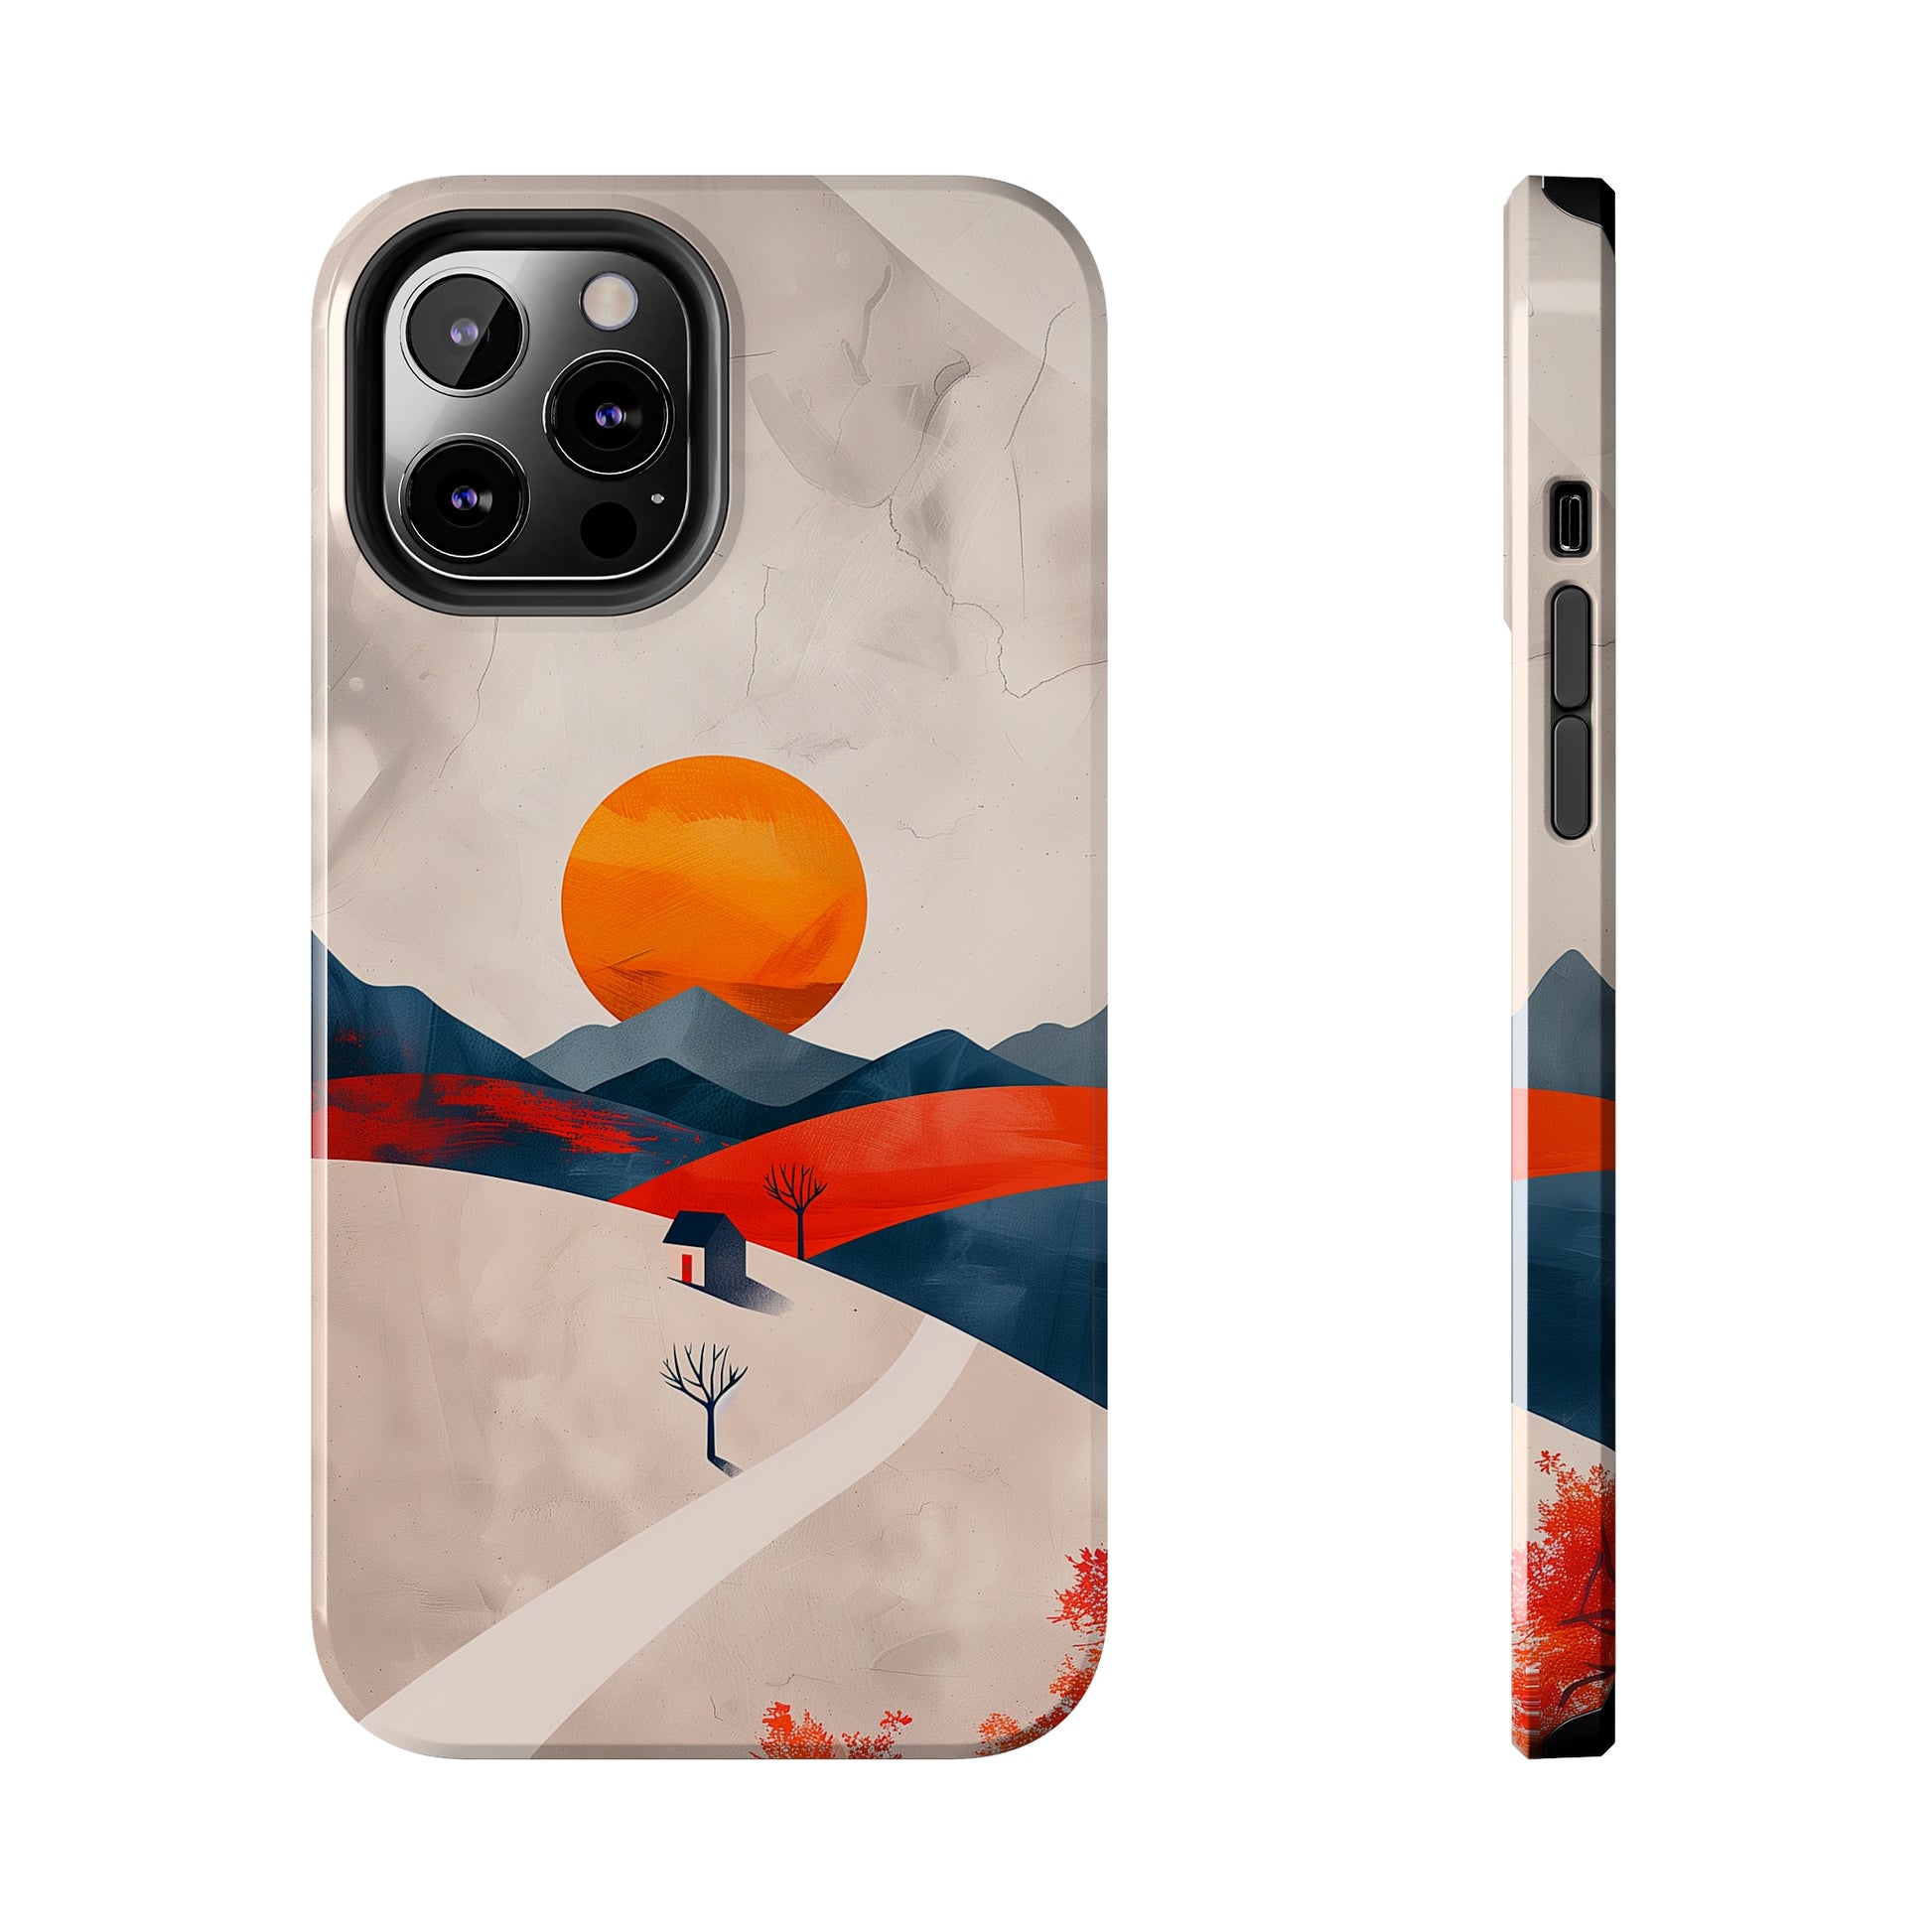 Amber Awakening (iPhone Case 11-15)Shop RIMA Tough Phone Case for iPhone 11-15: Ultimate protection with double-layer defense, glossy finish, and wireless charging compatibility. Urban and weather-resRimaGallery